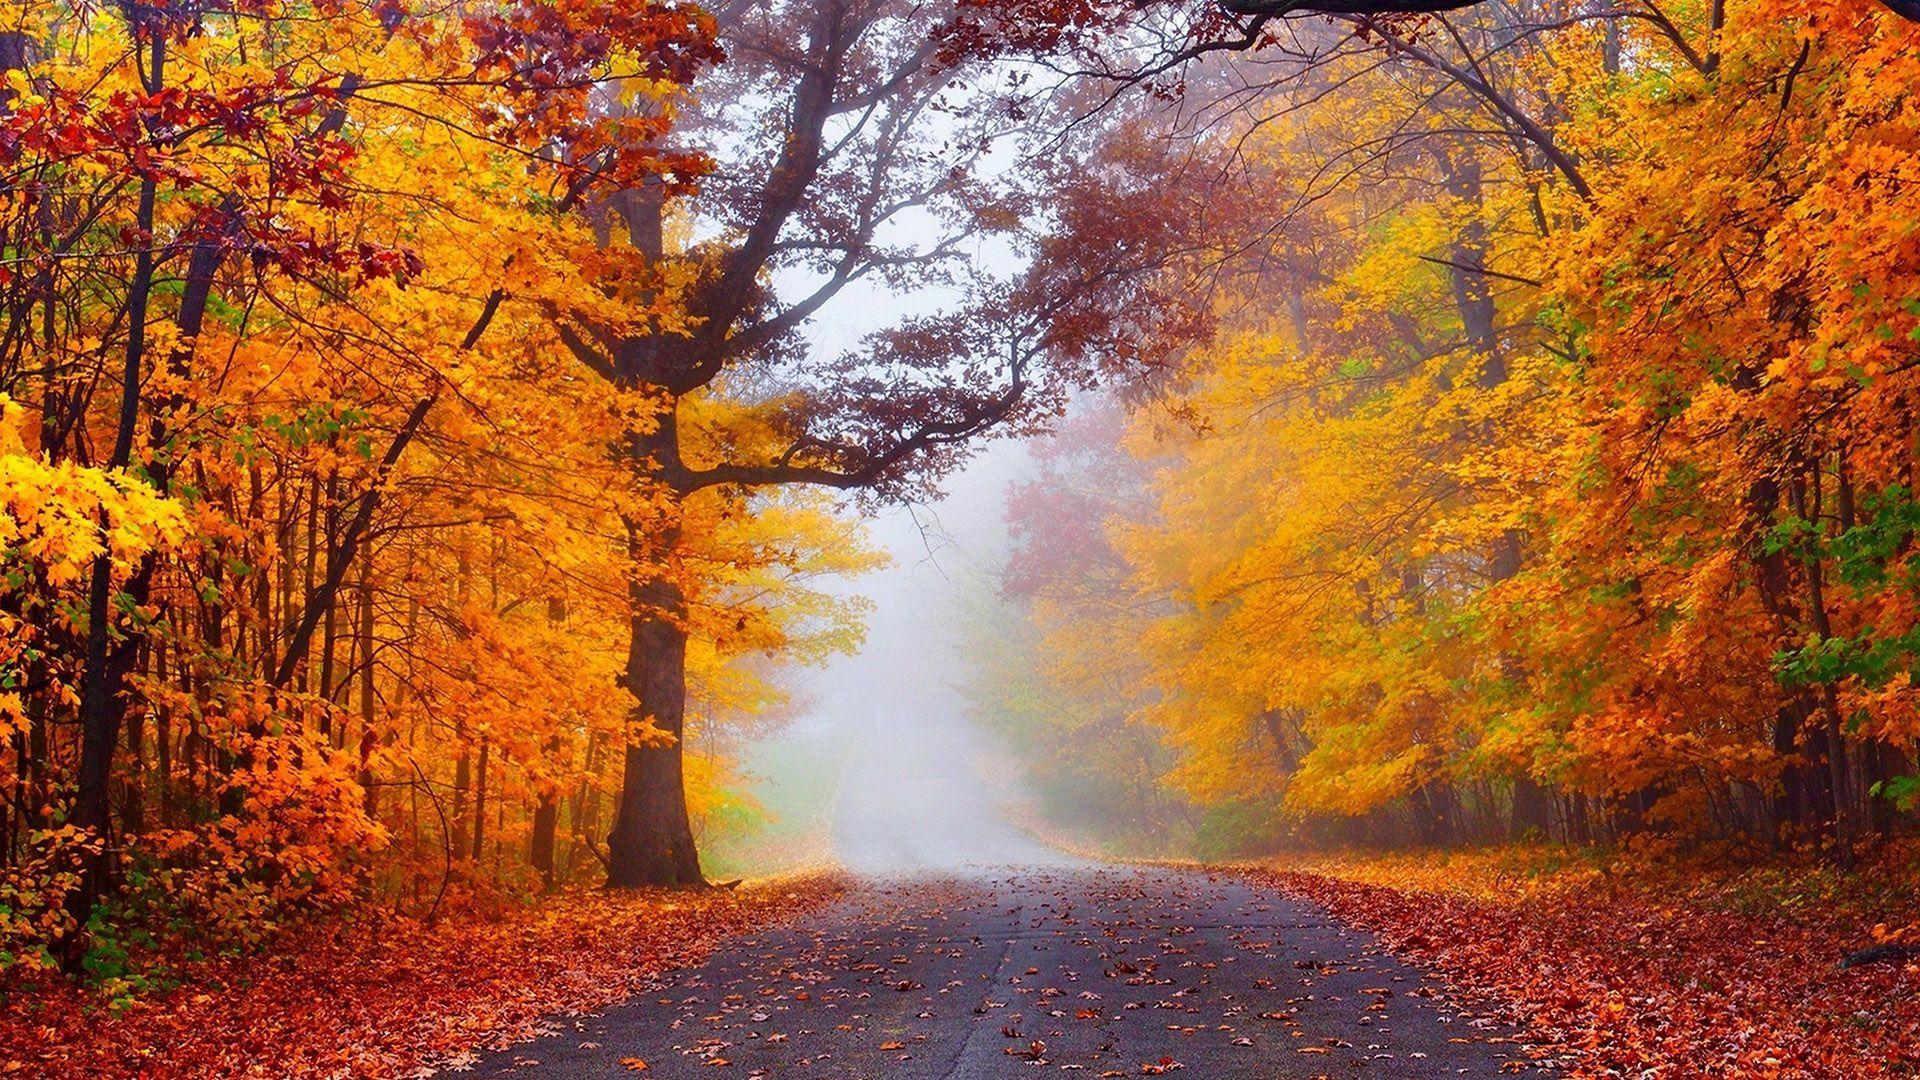 Fog In The Autumn Forest - Fall The Season Of Change - HD Wallpaper 